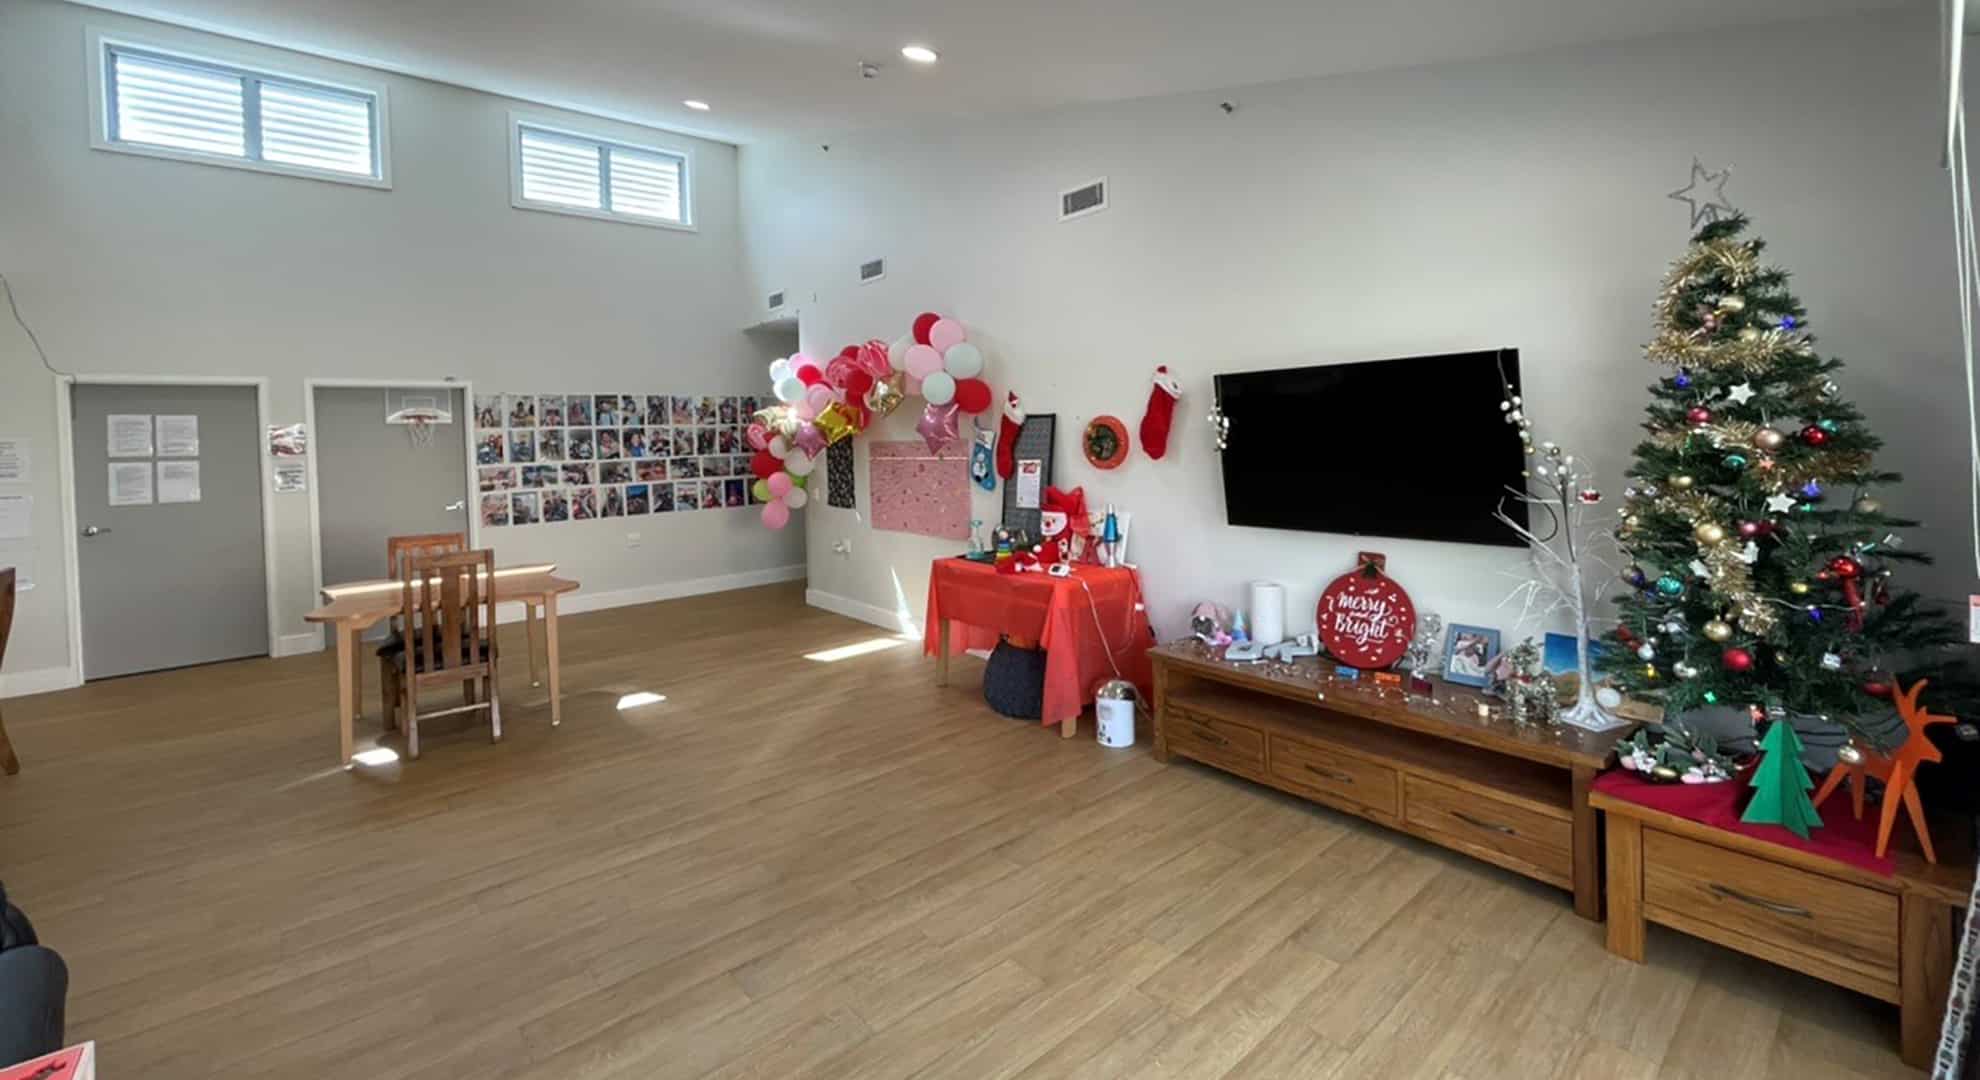 Large open living area with television, storage units, small table and chairs and a Christmas decorations and tree in the corner.